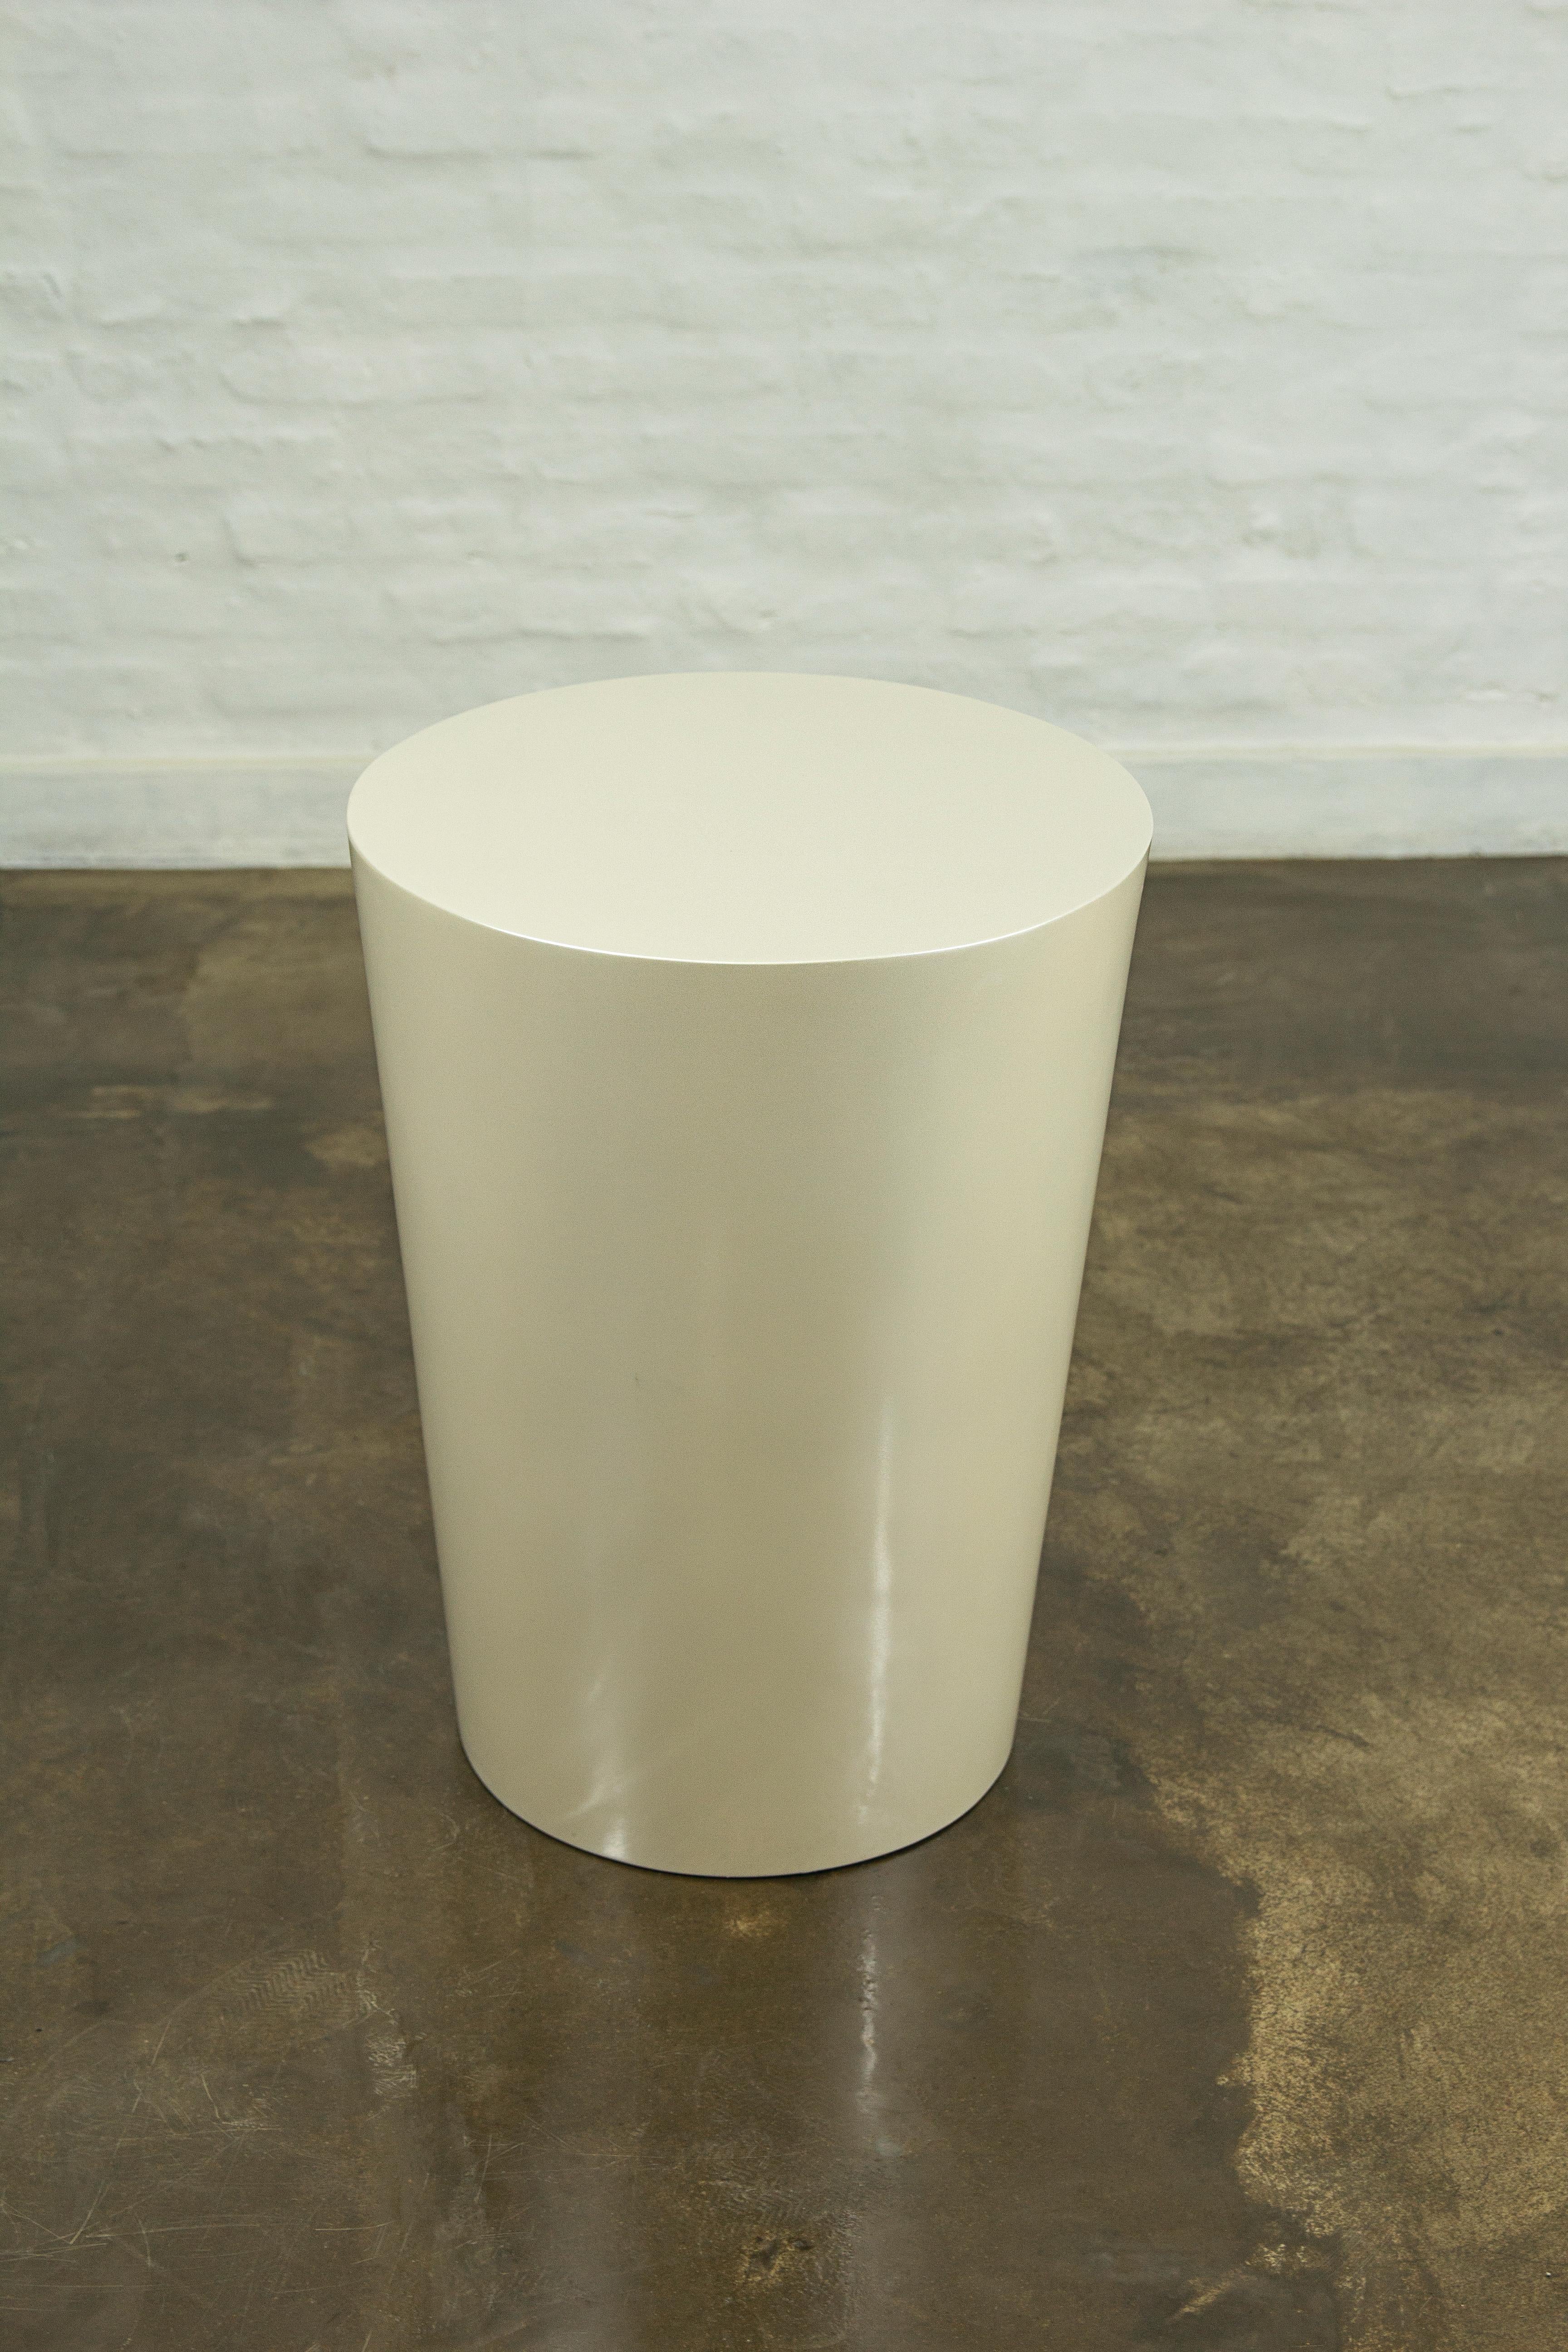 The TR series from Costantini can function as an accent table or a stool. Its unadorned geometric shape begs perfection from its high-gloss finish and complements any style interior with a dash of modern simplicity. 

We have this in stock and